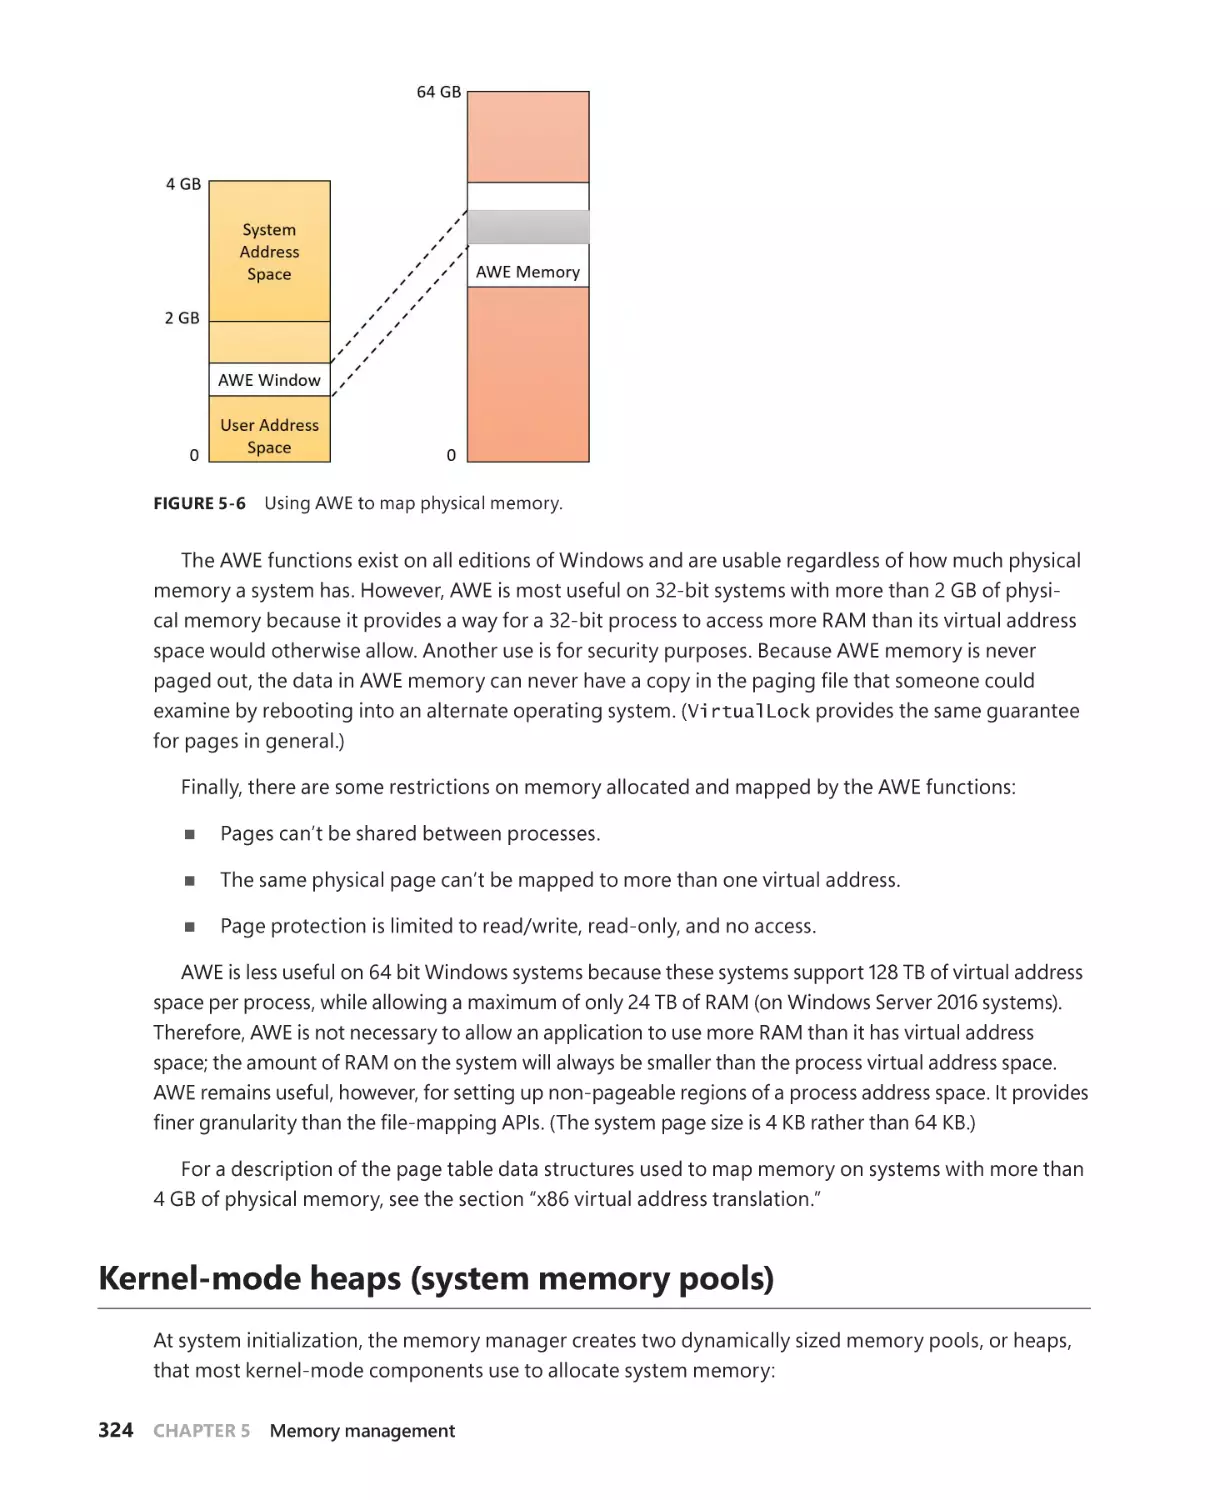 Kernel-mode heaps (system memory pools)